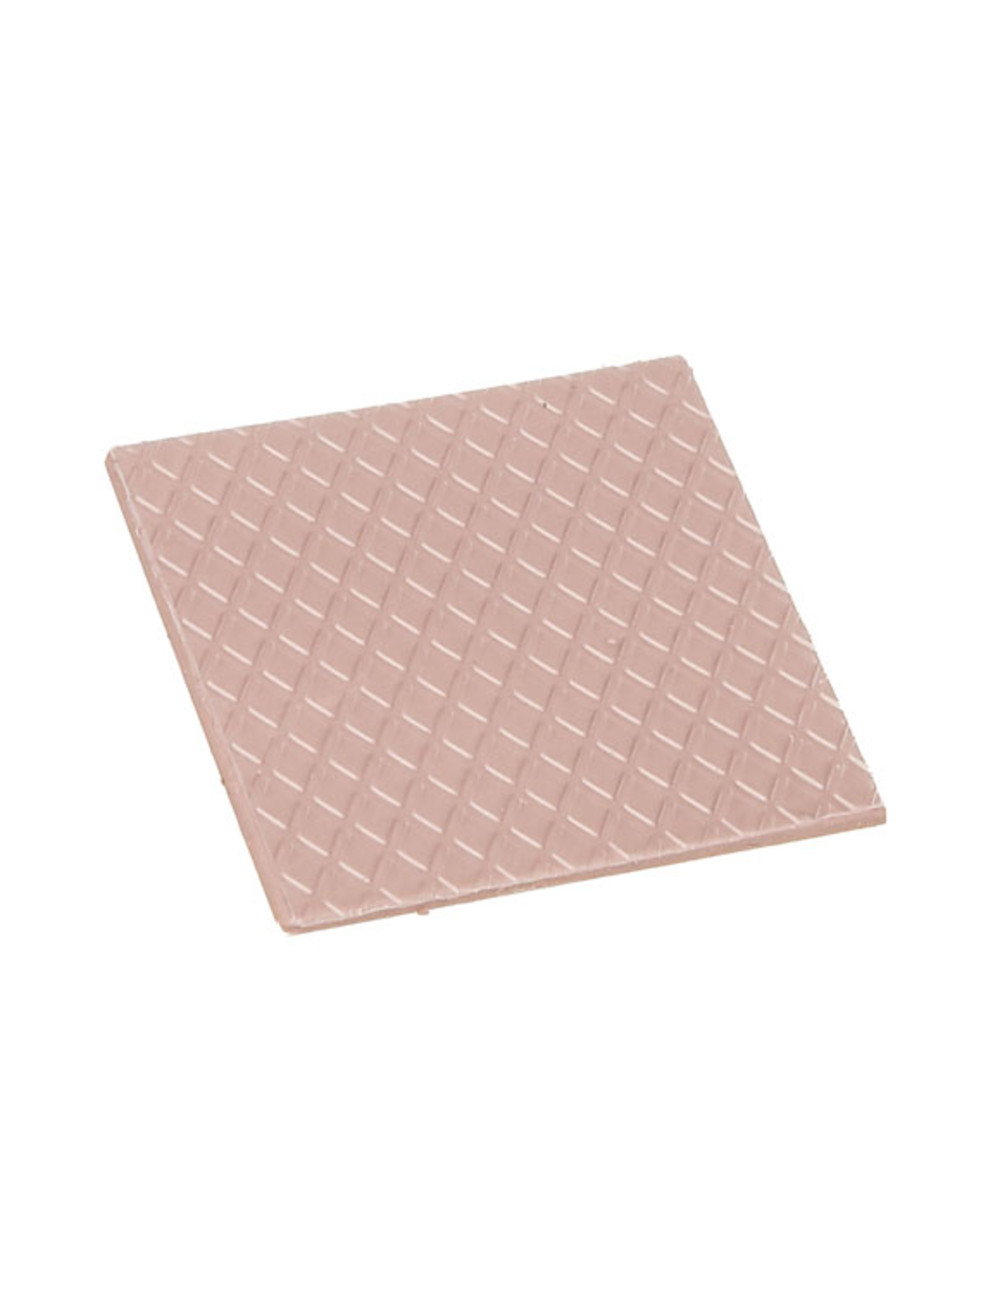 Thermal Grizzly Minus Pad 8 - 30 x 30 x 0.5 mm